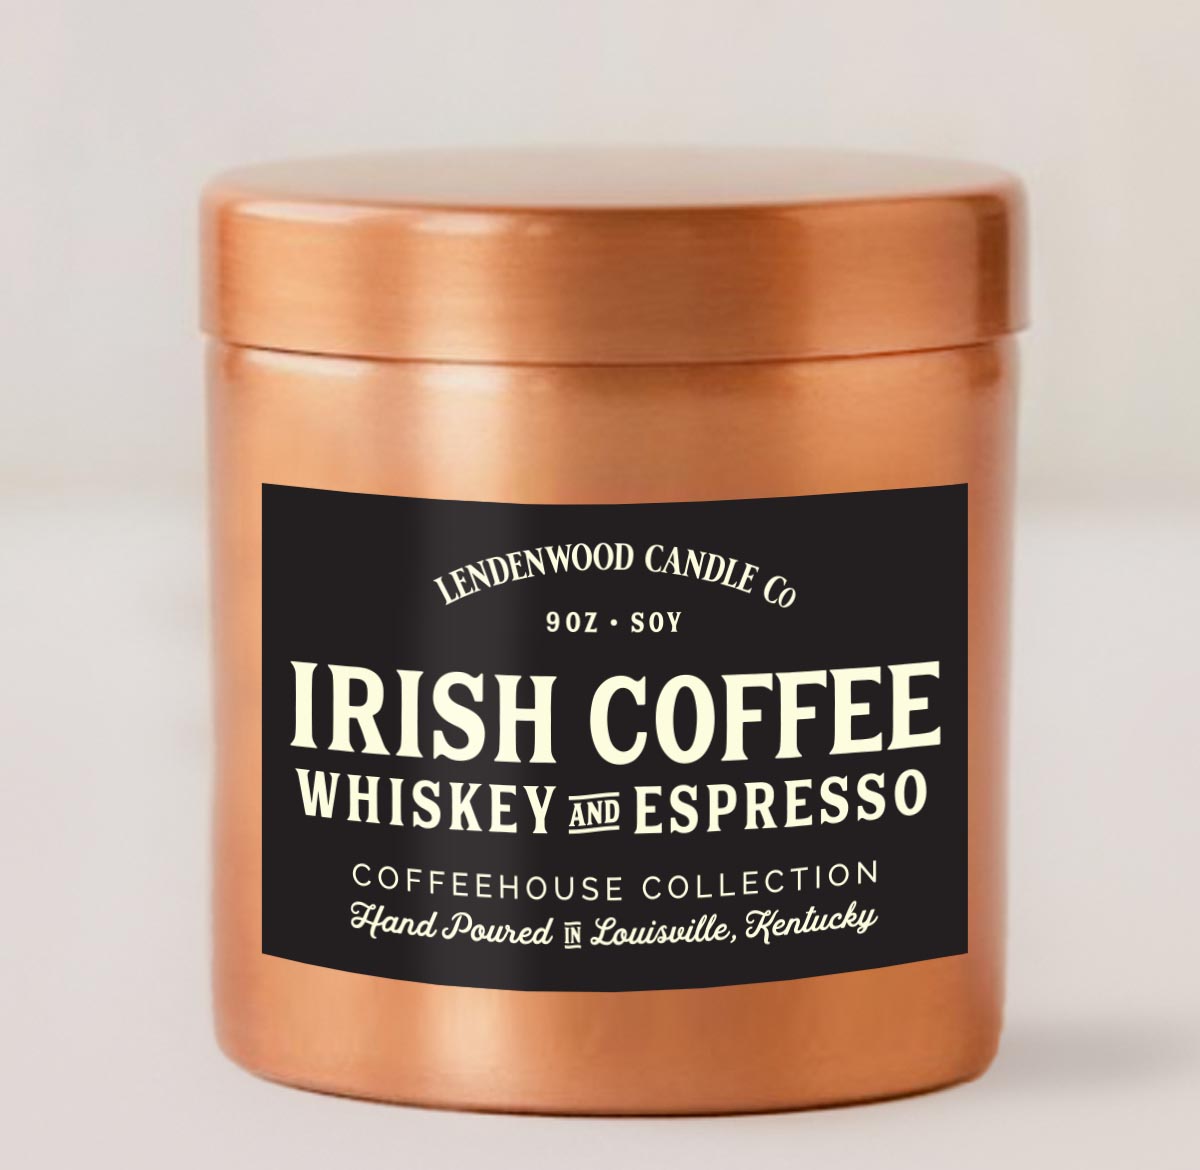 Irish Coffee (Whiskey and Espresso) Scented Soy Candle